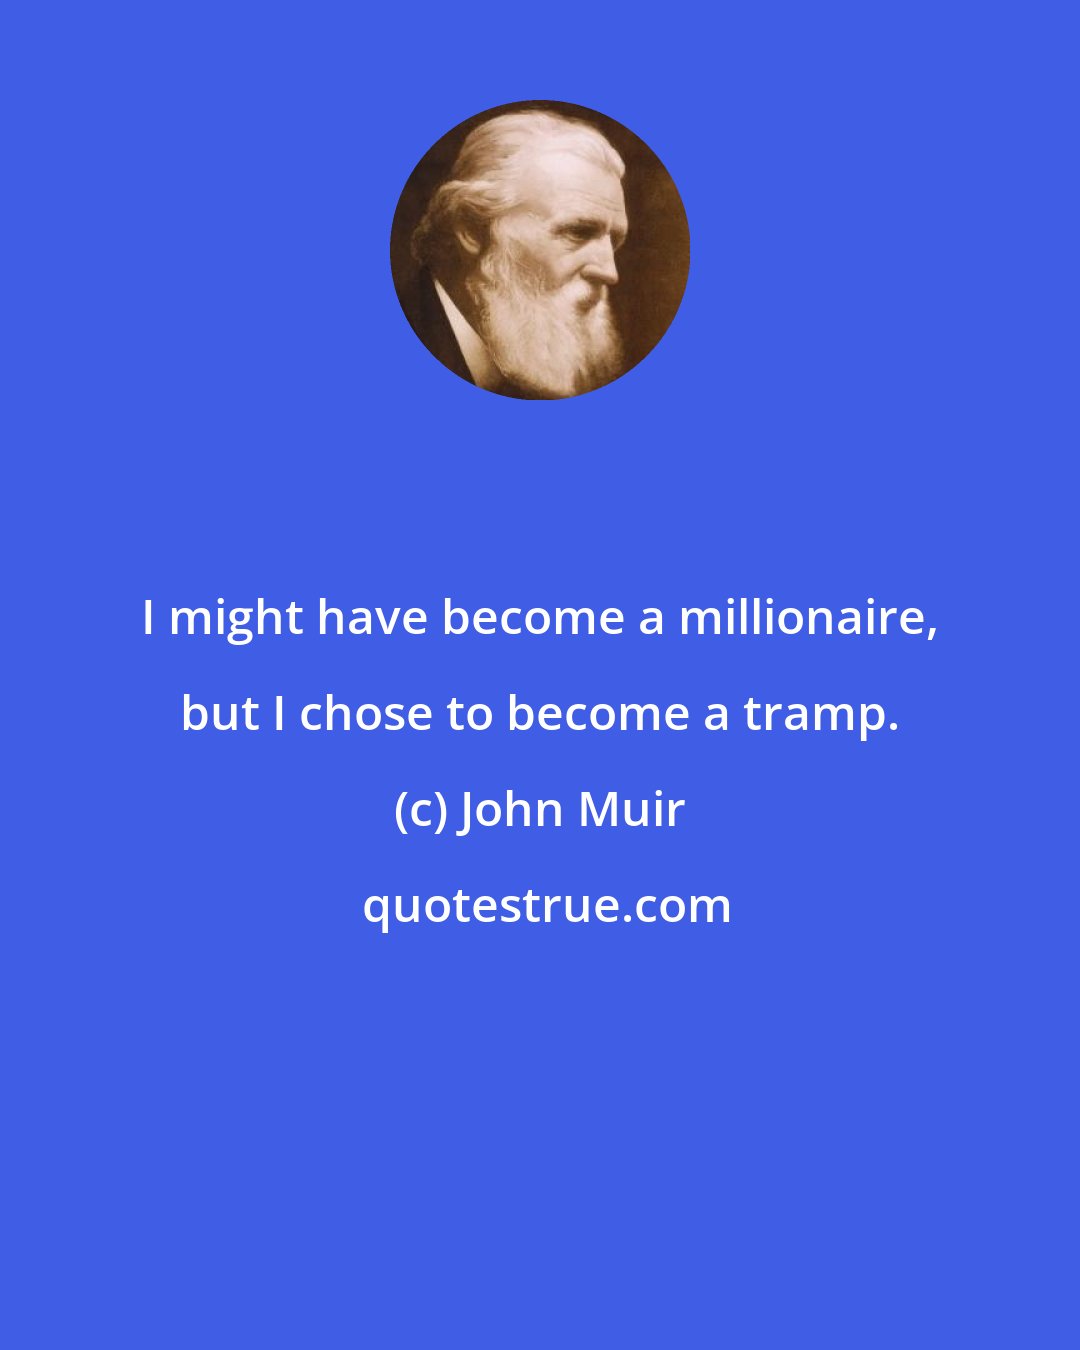 John Muir: I might have become a millionaire, but I chose to become a tramp.